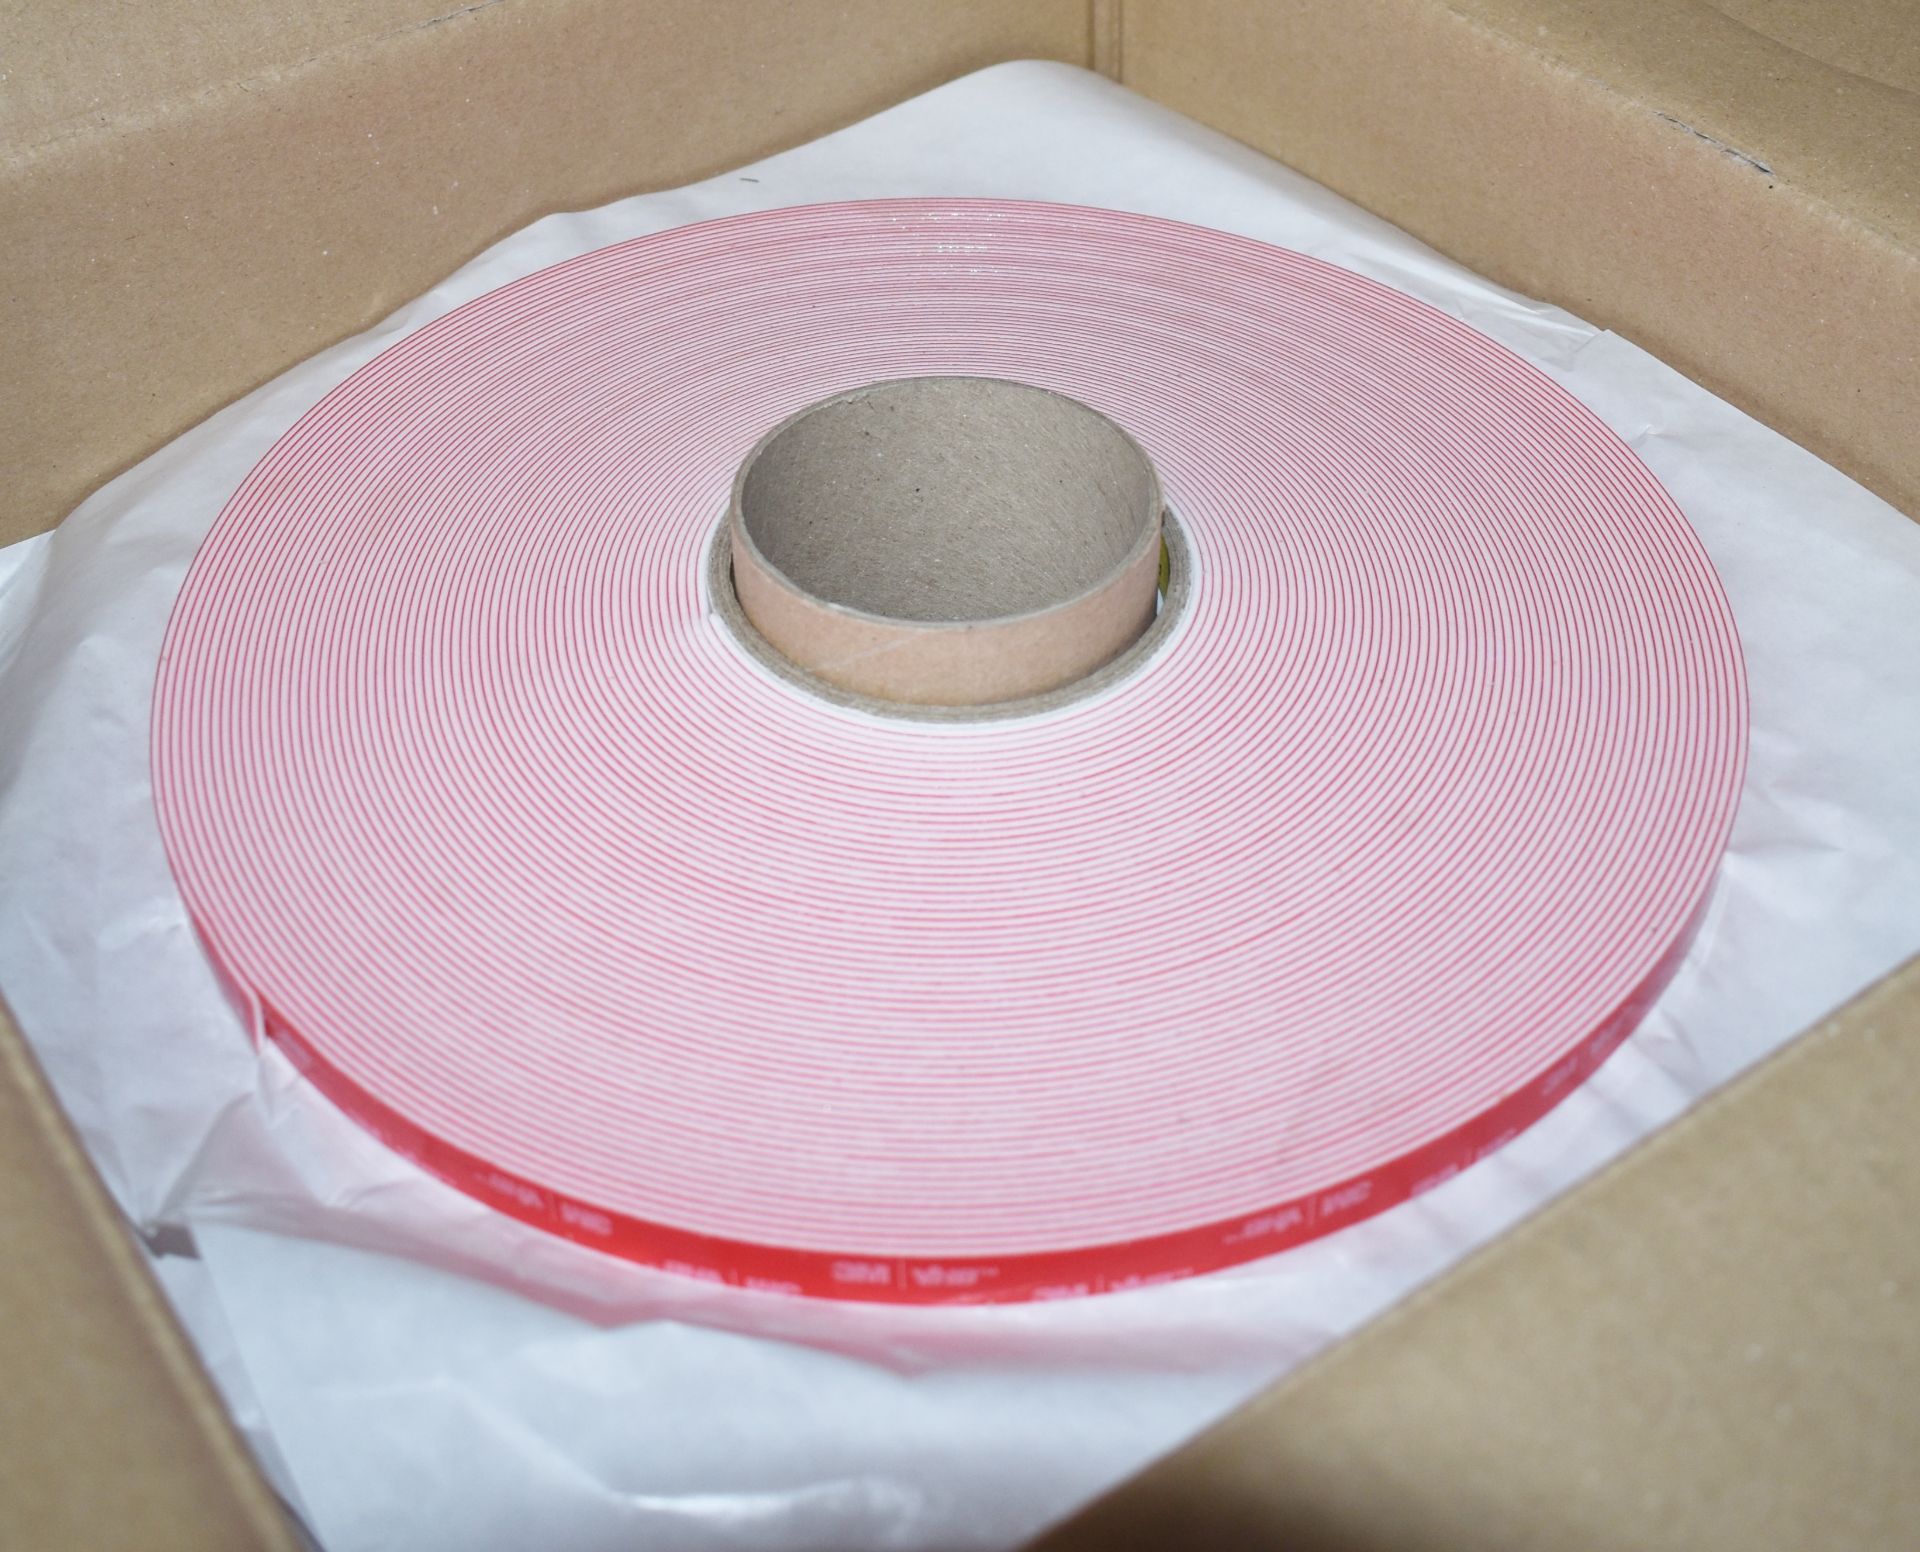 8 x Rolls of 3M VHB Double Sided Acrylic Adhesive Foam Core Tape - Type LSE-160WF - RRP £336 - New - Image 4 of 4